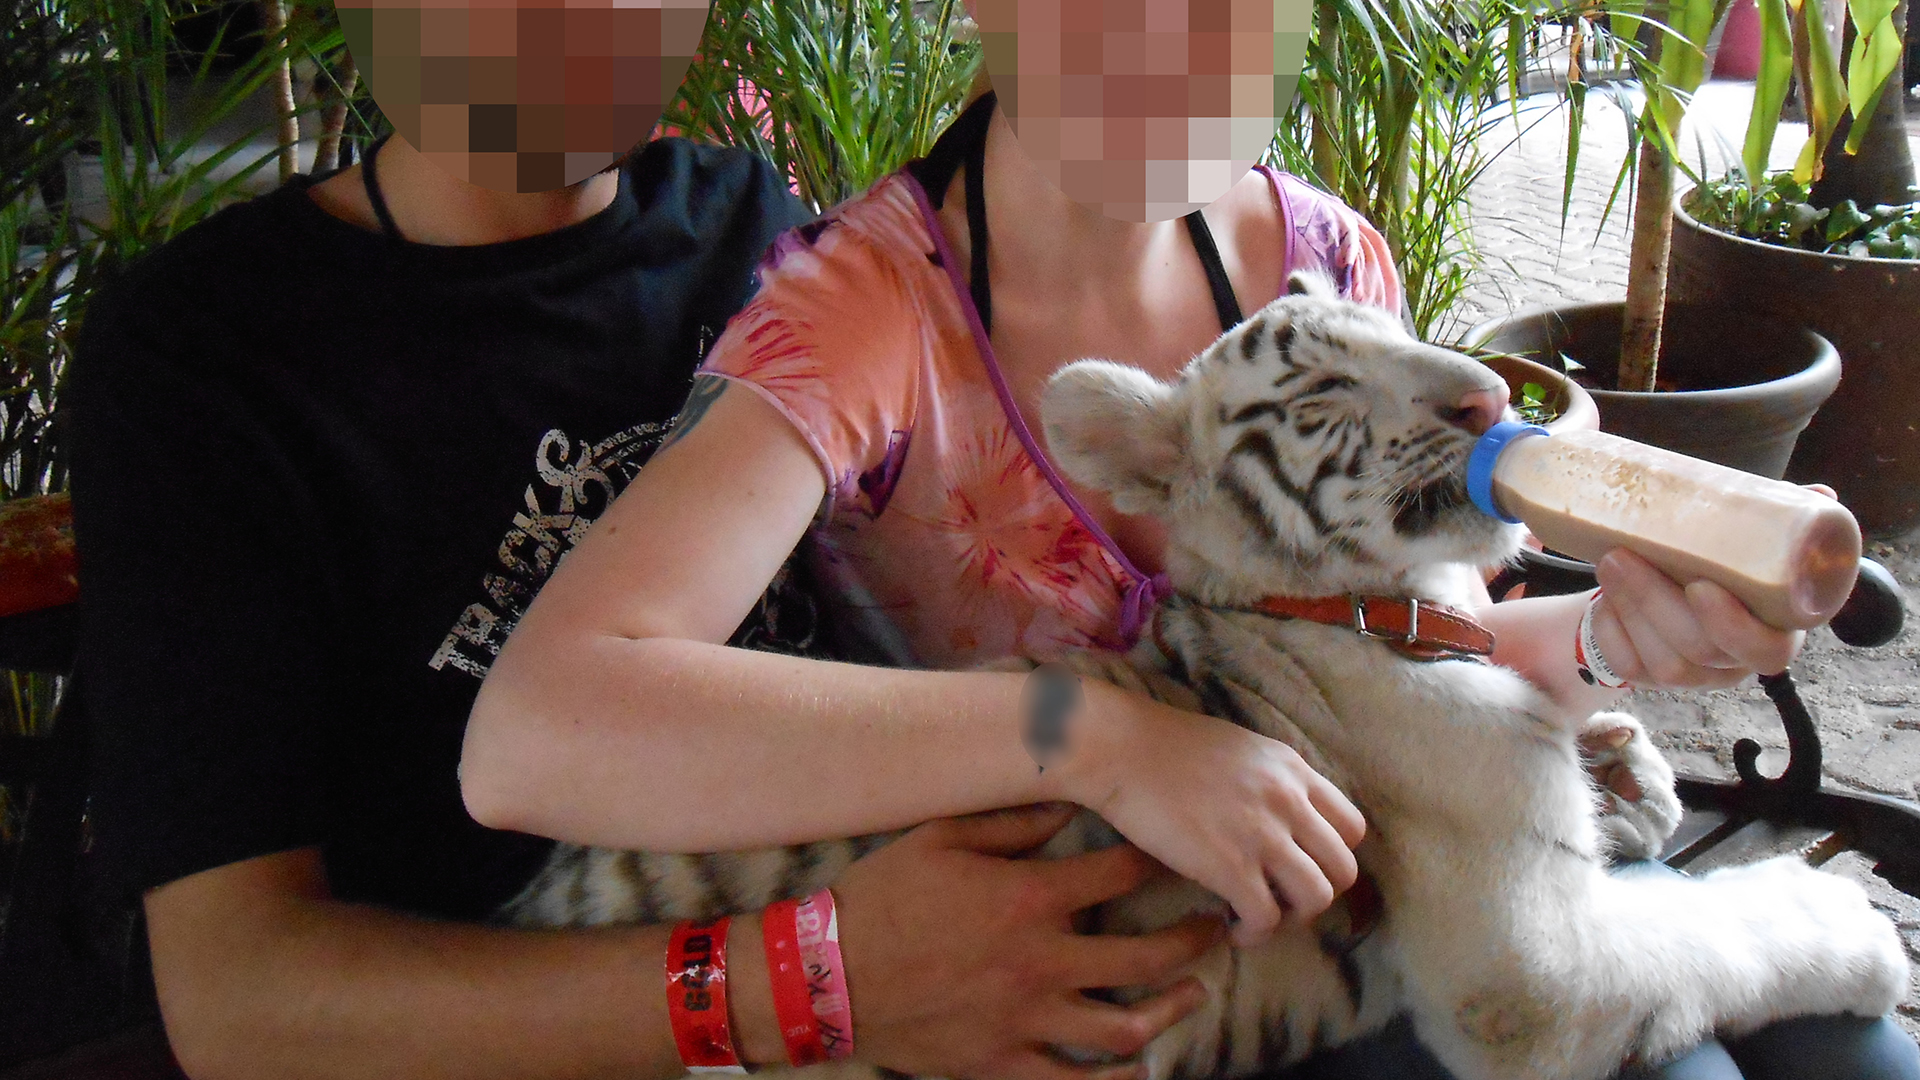 Two people holding bottle feeding a white tiger cub which is wearing a collar.